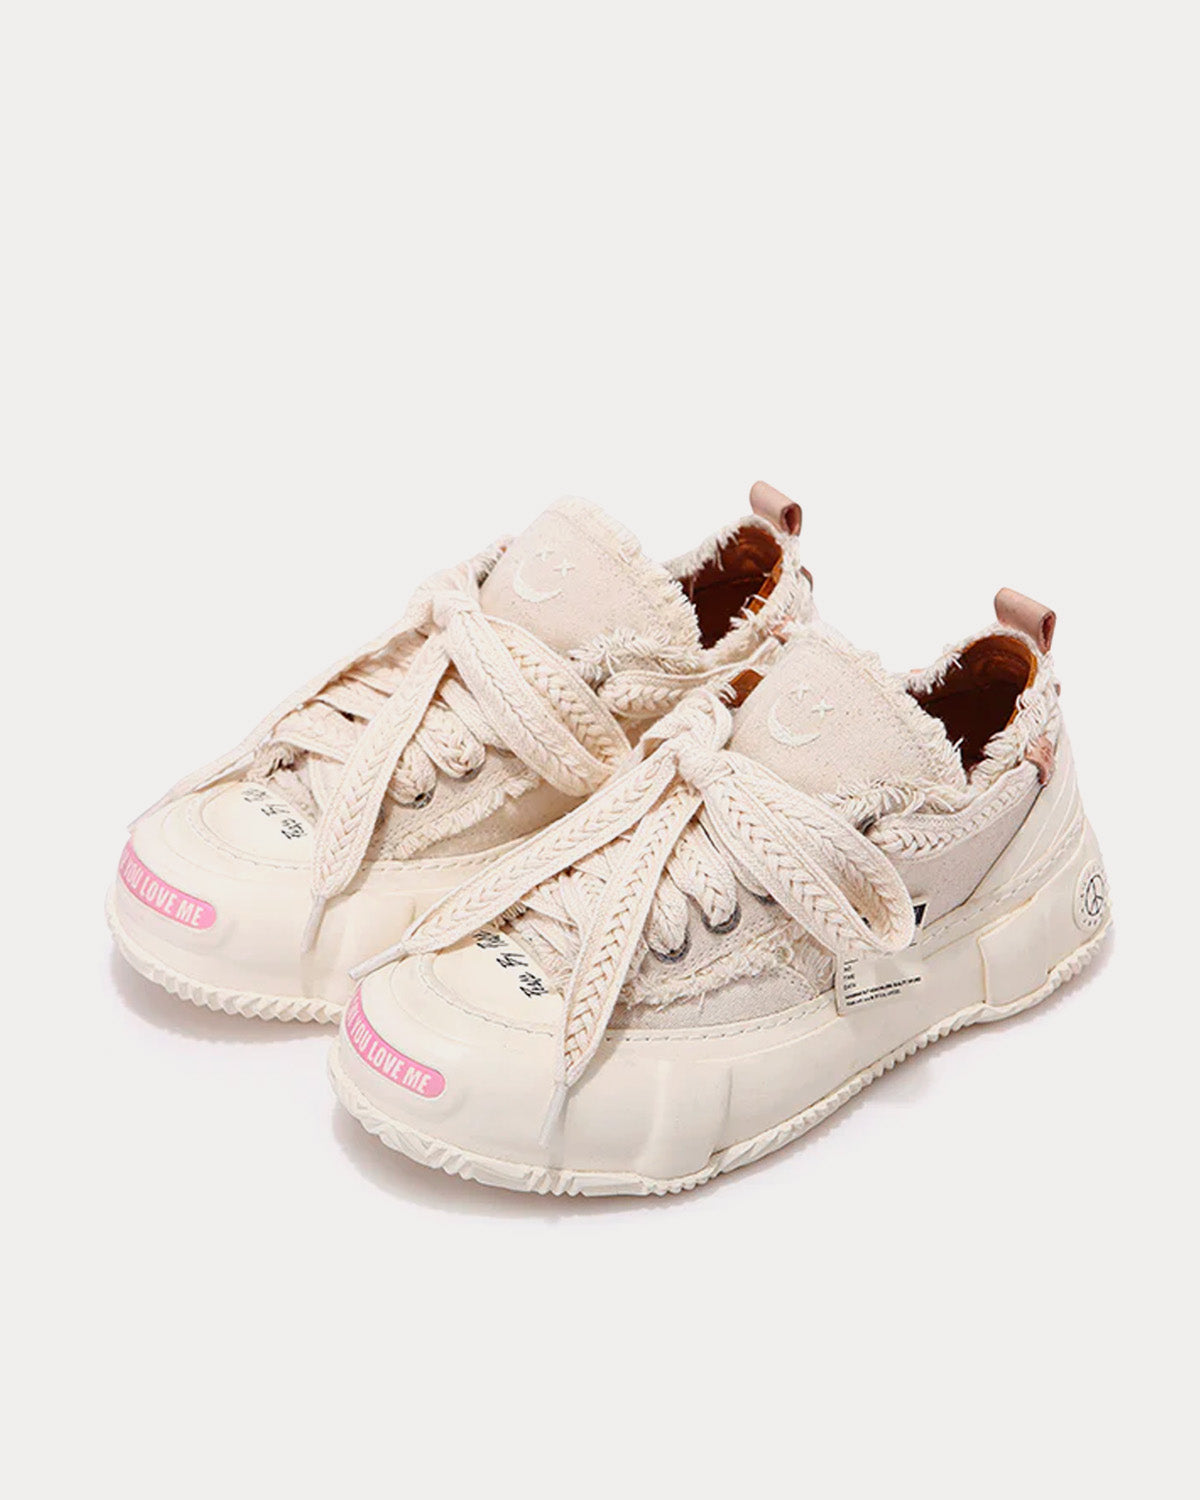 xVESSEL - G.O.P. 2.0 Marshmallow White / White Low Top Sneakers